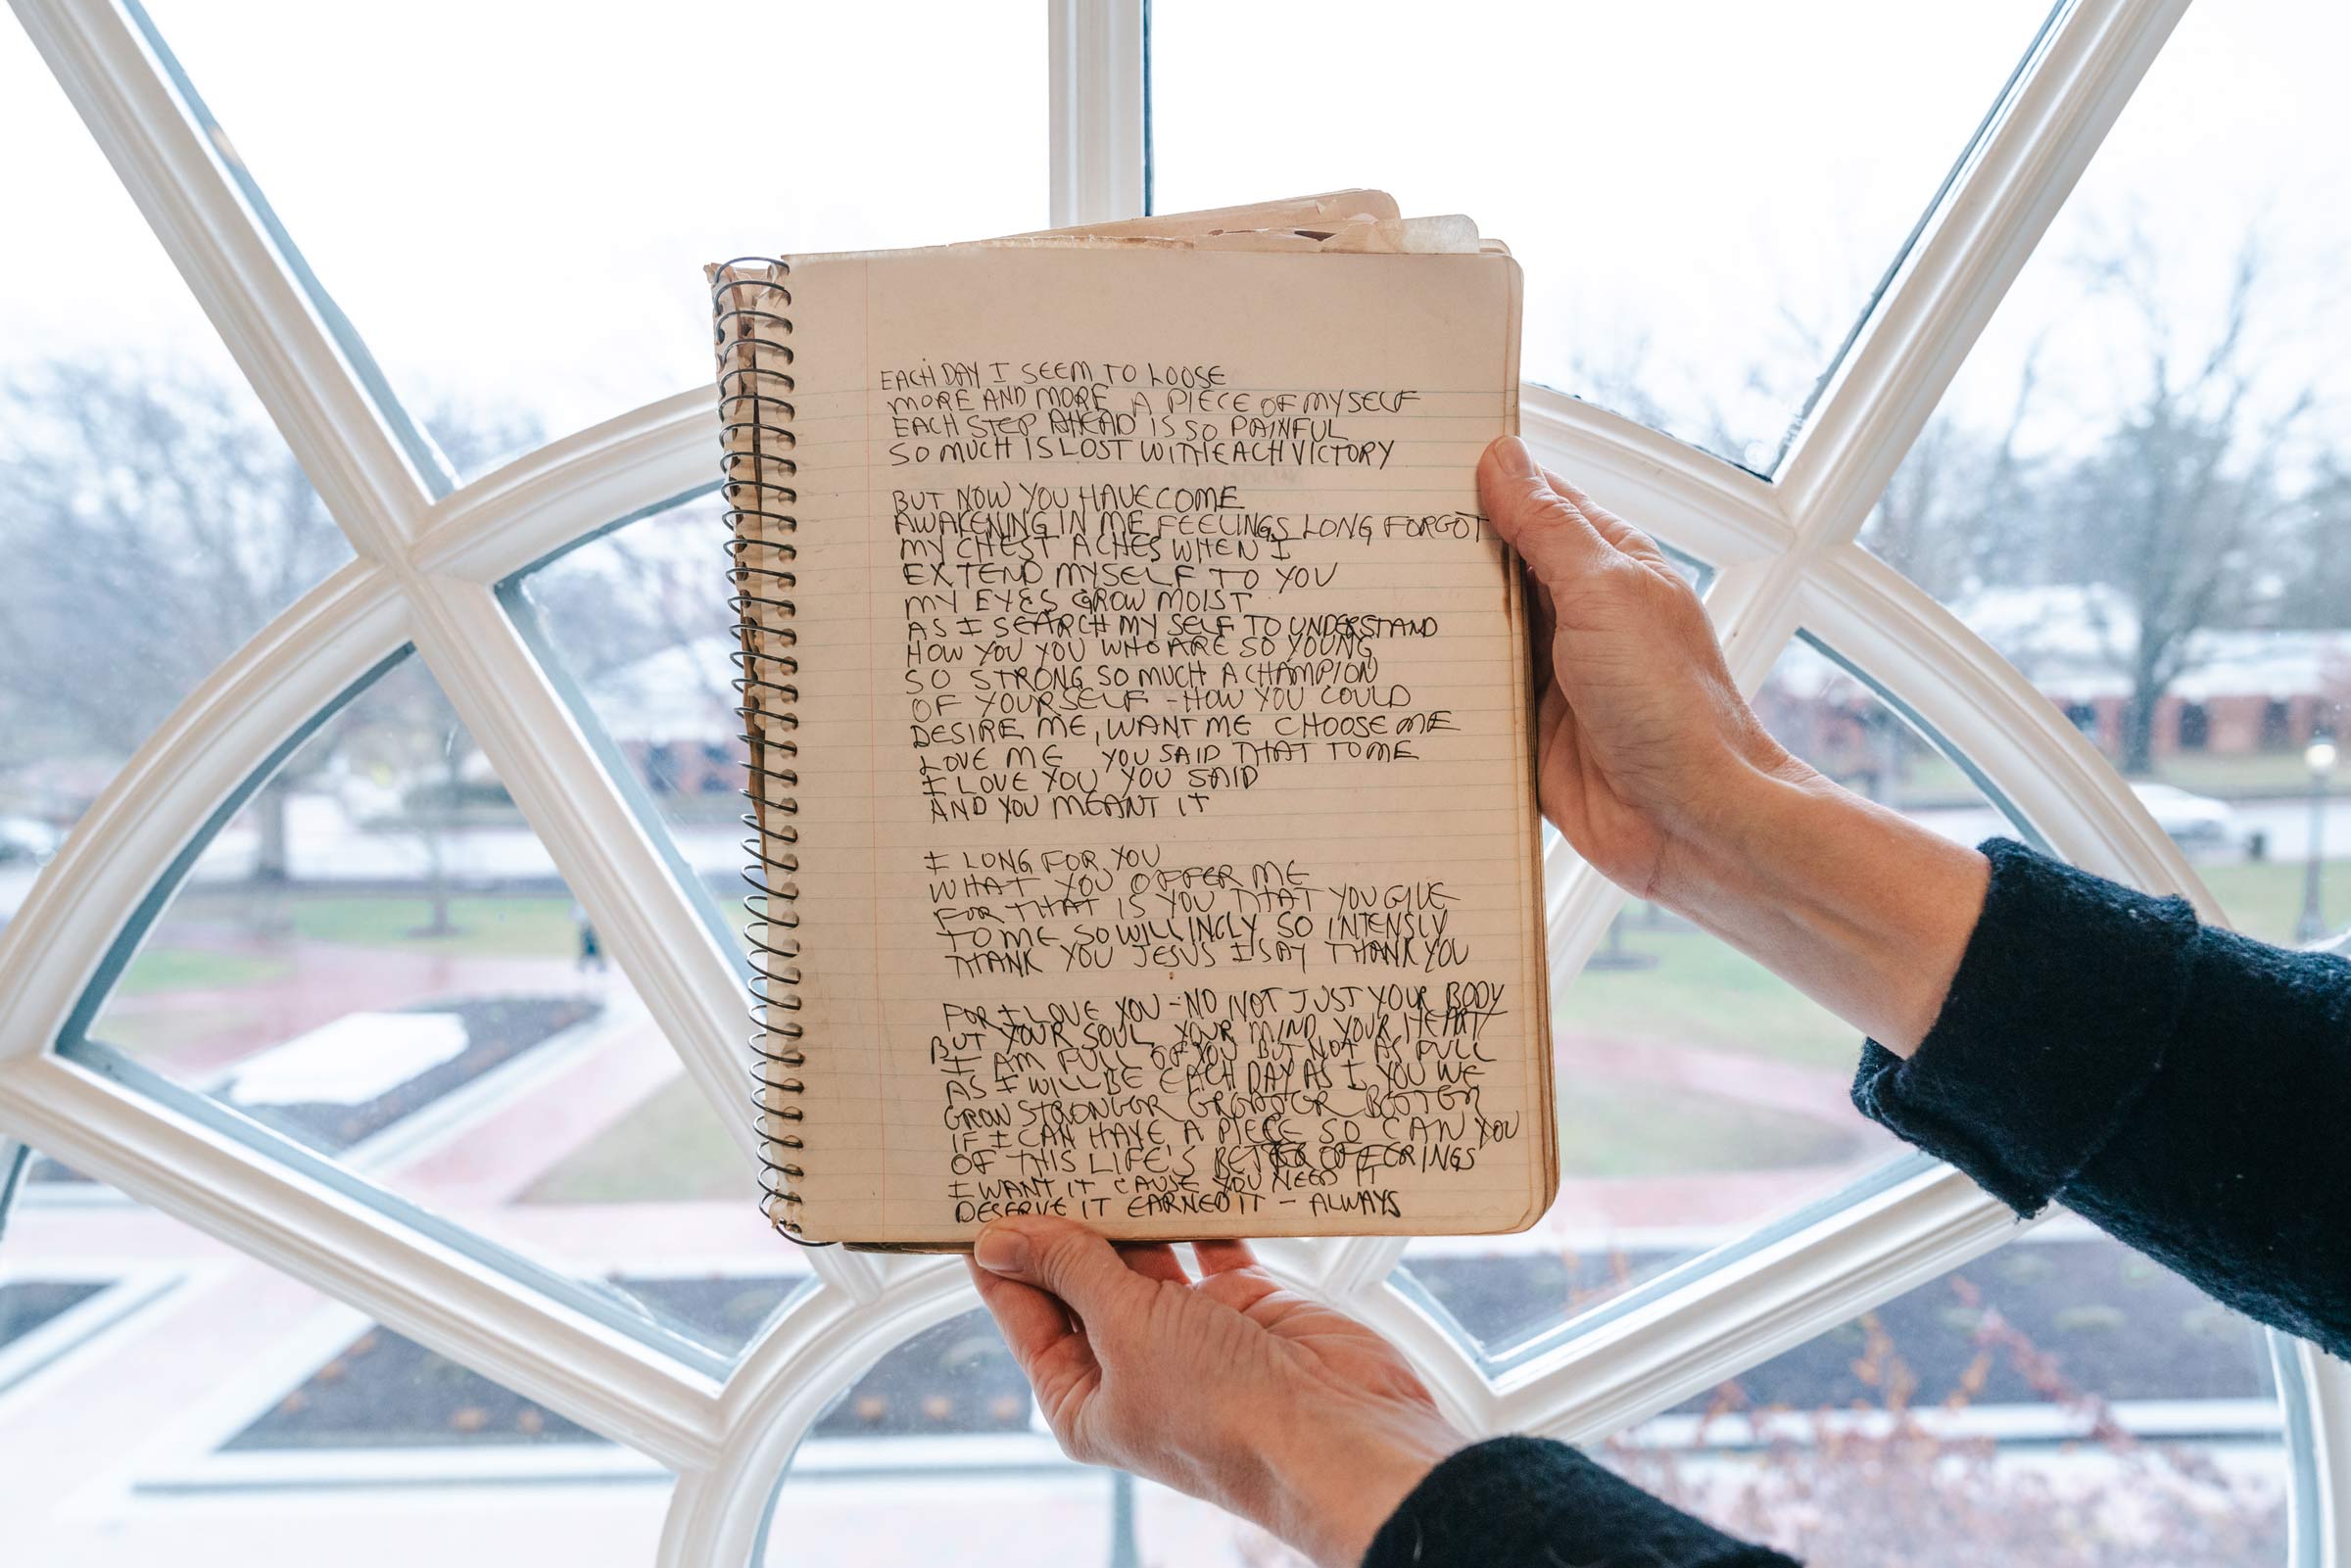 A journal is held up in front of a half circle window